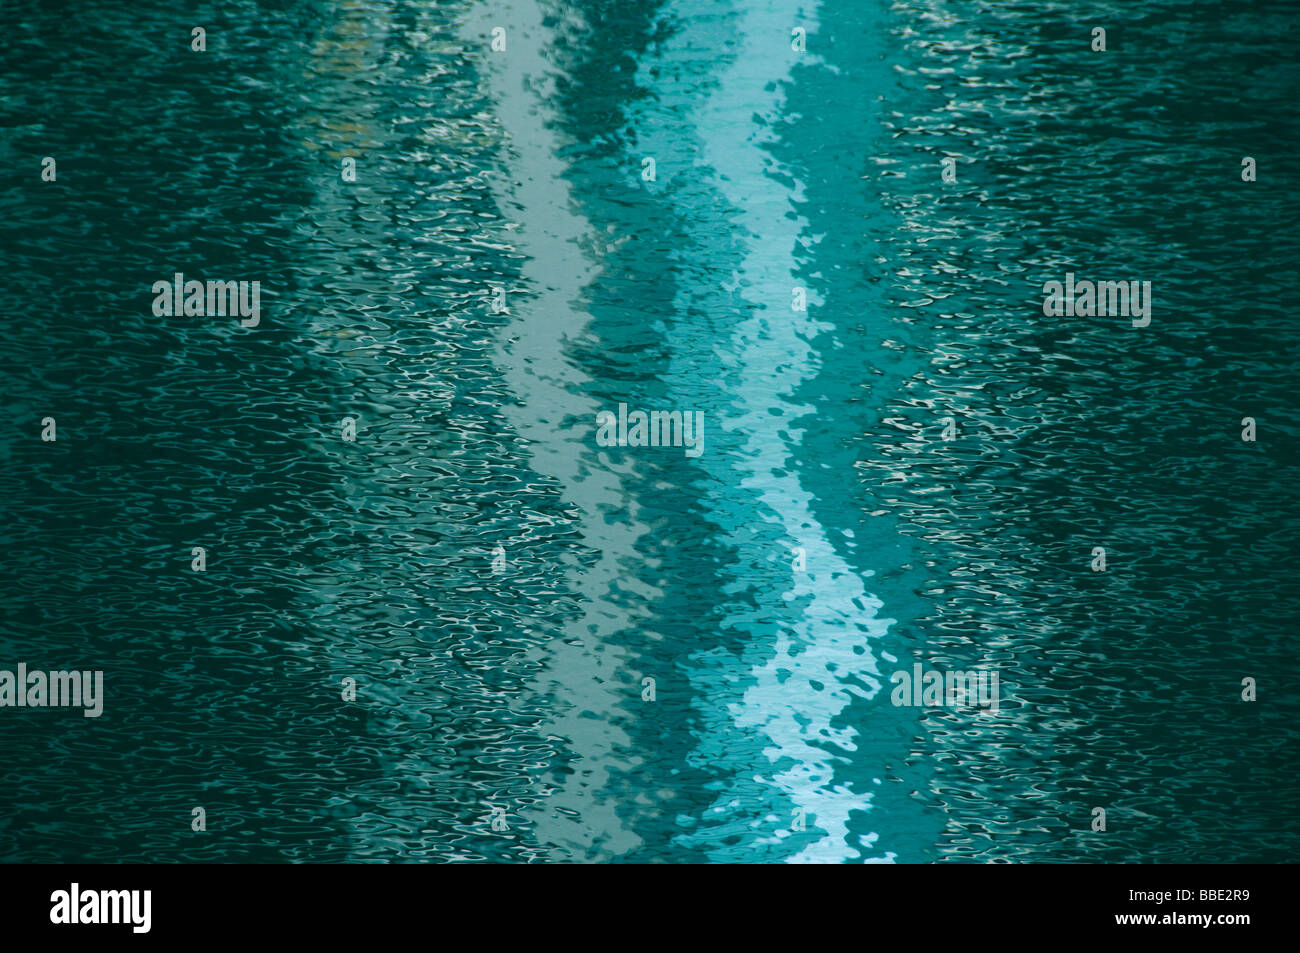 Abstract water pattern Stock Photo